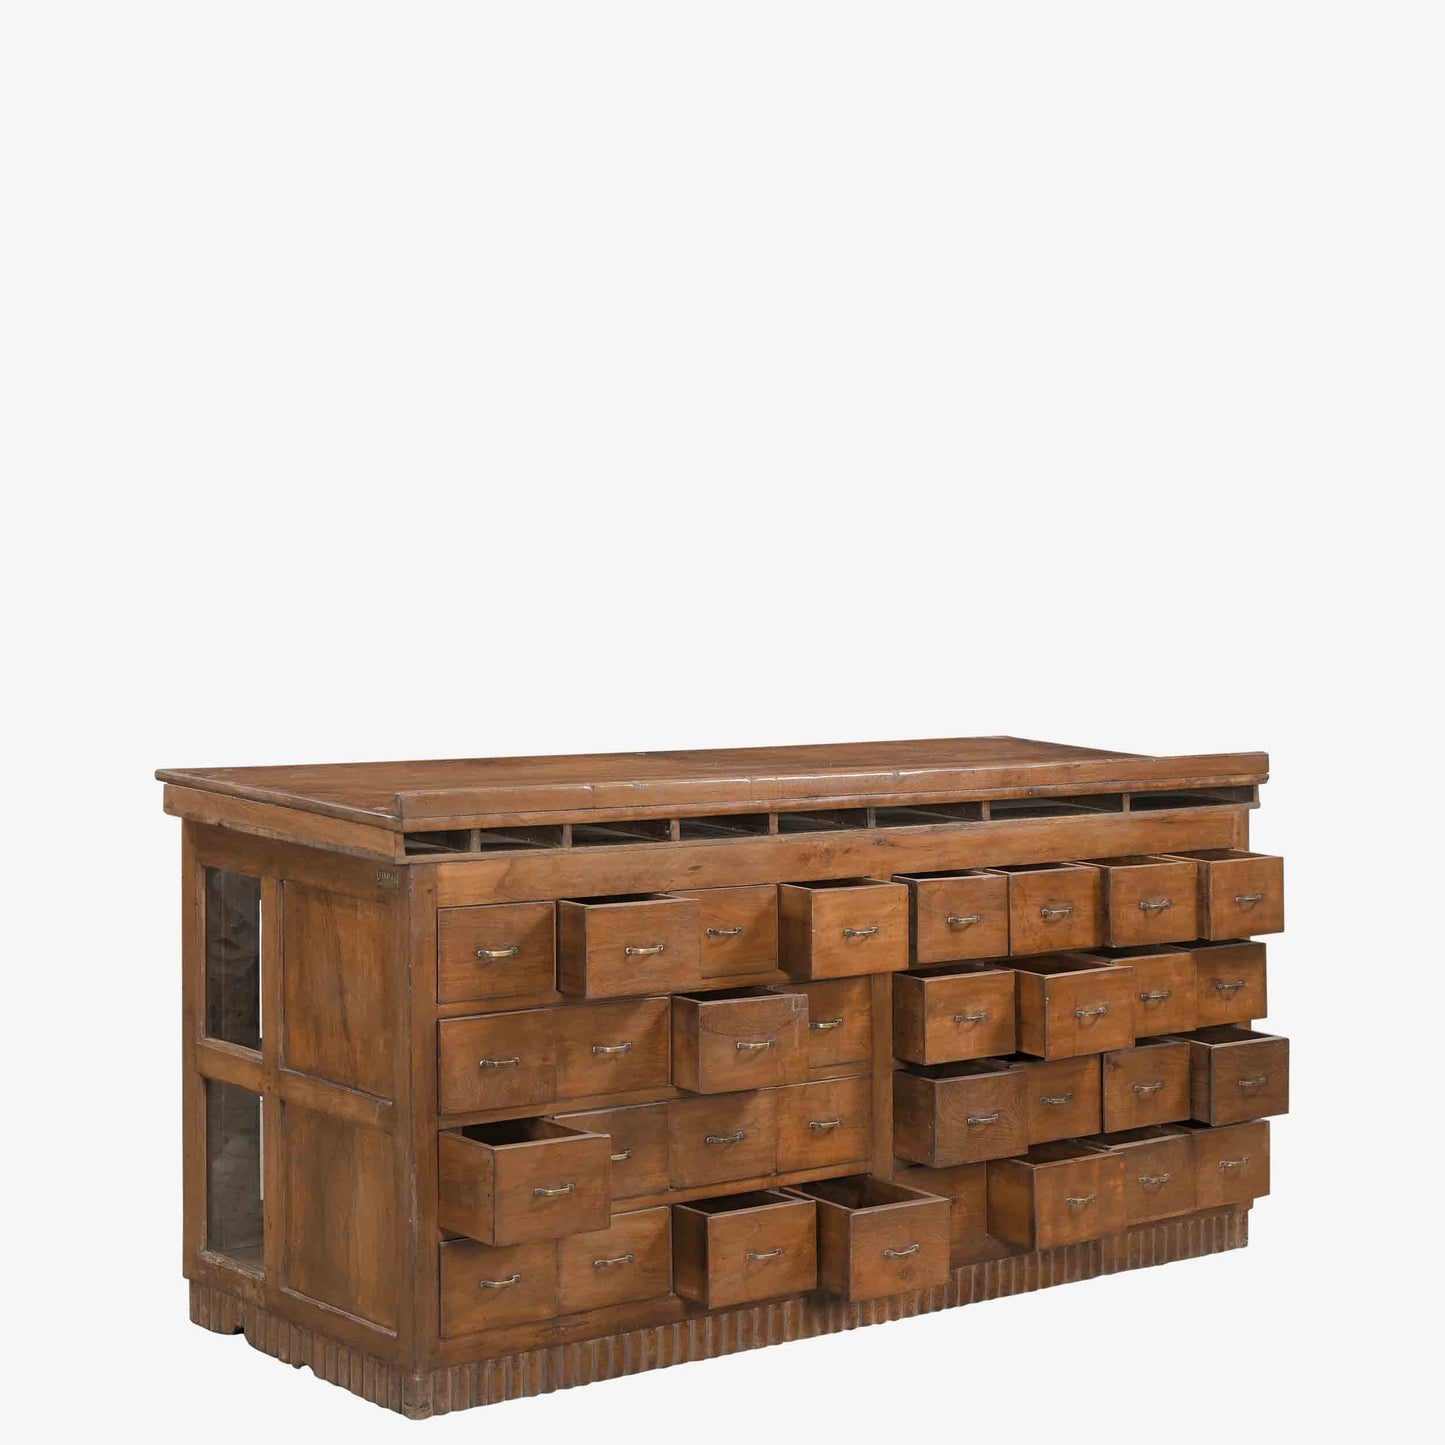 The Flynn Antique Island with Drawers